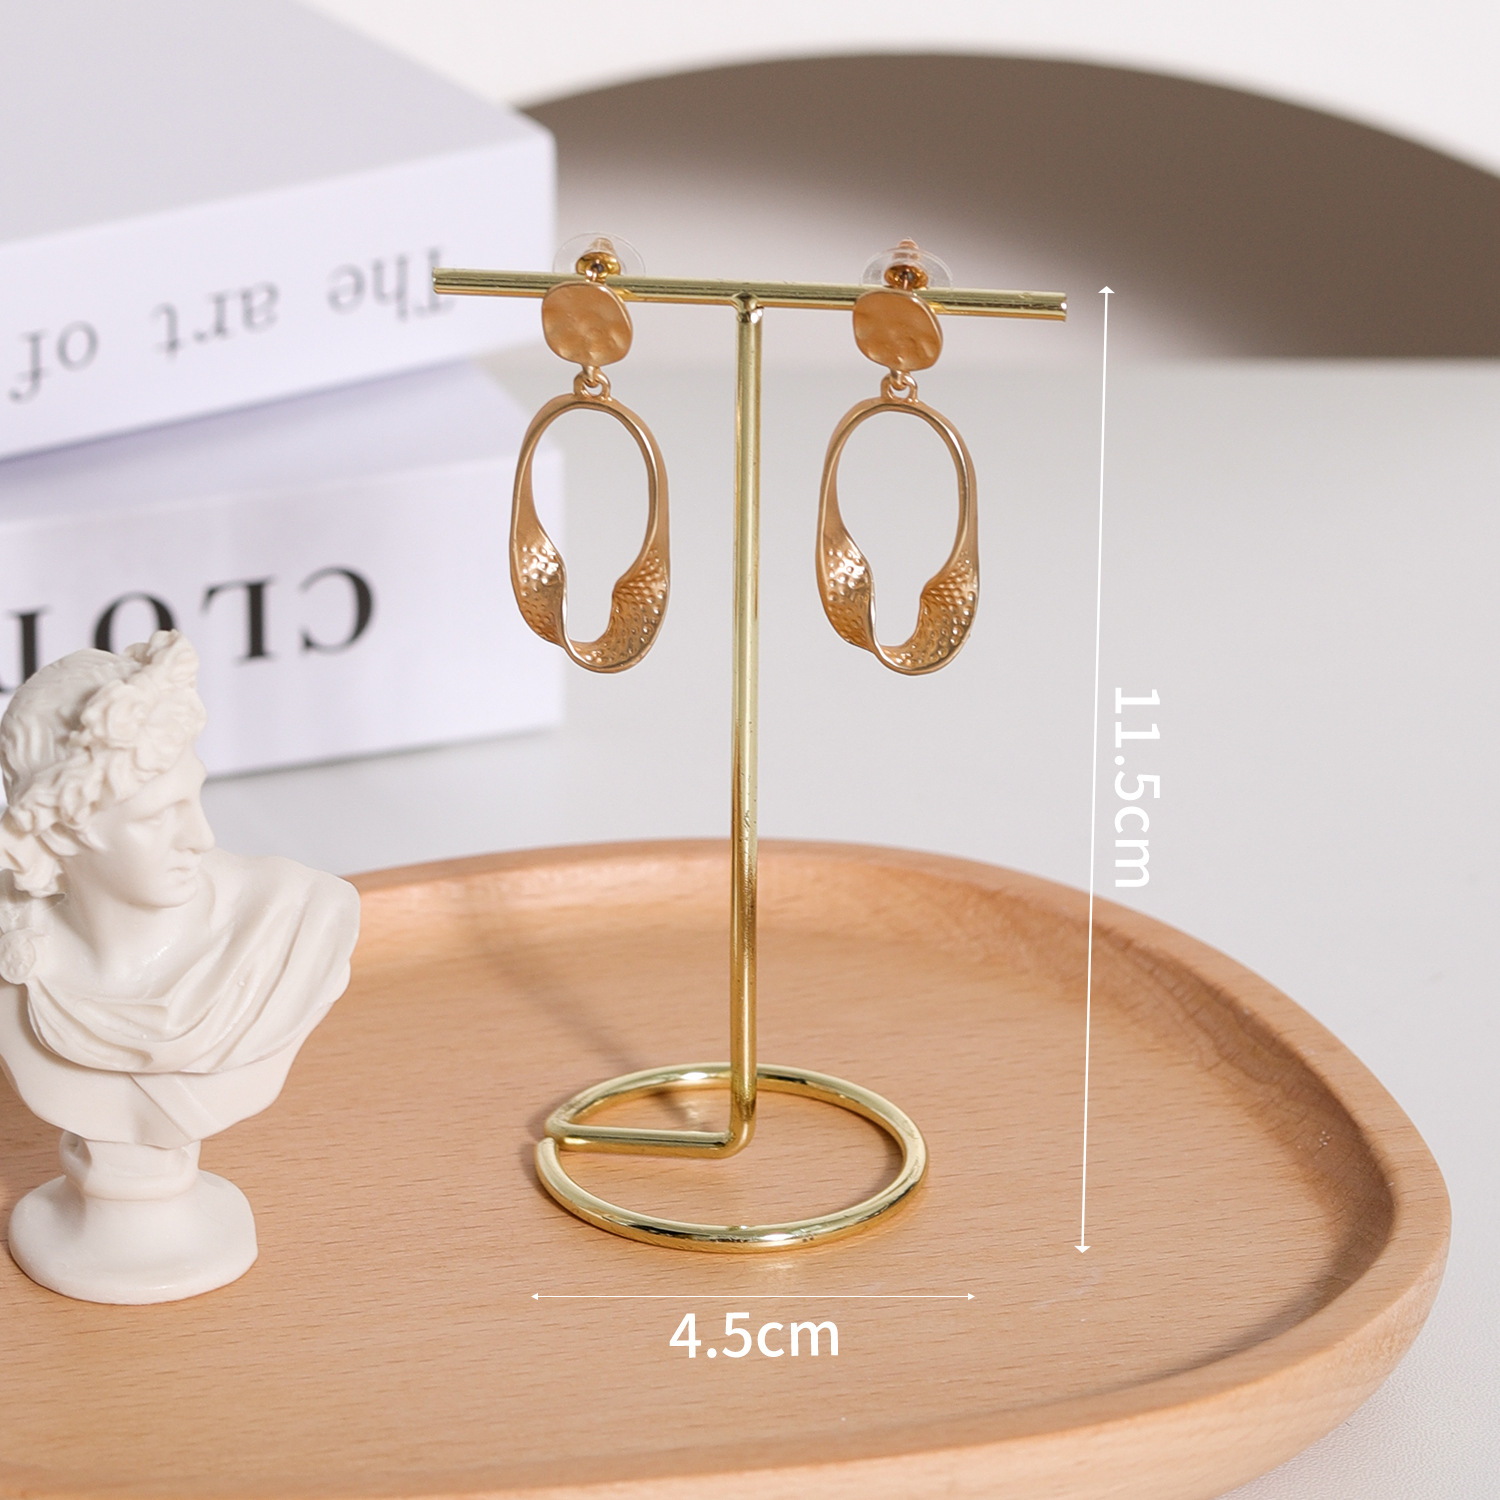 4:T-shaped jewelry holder